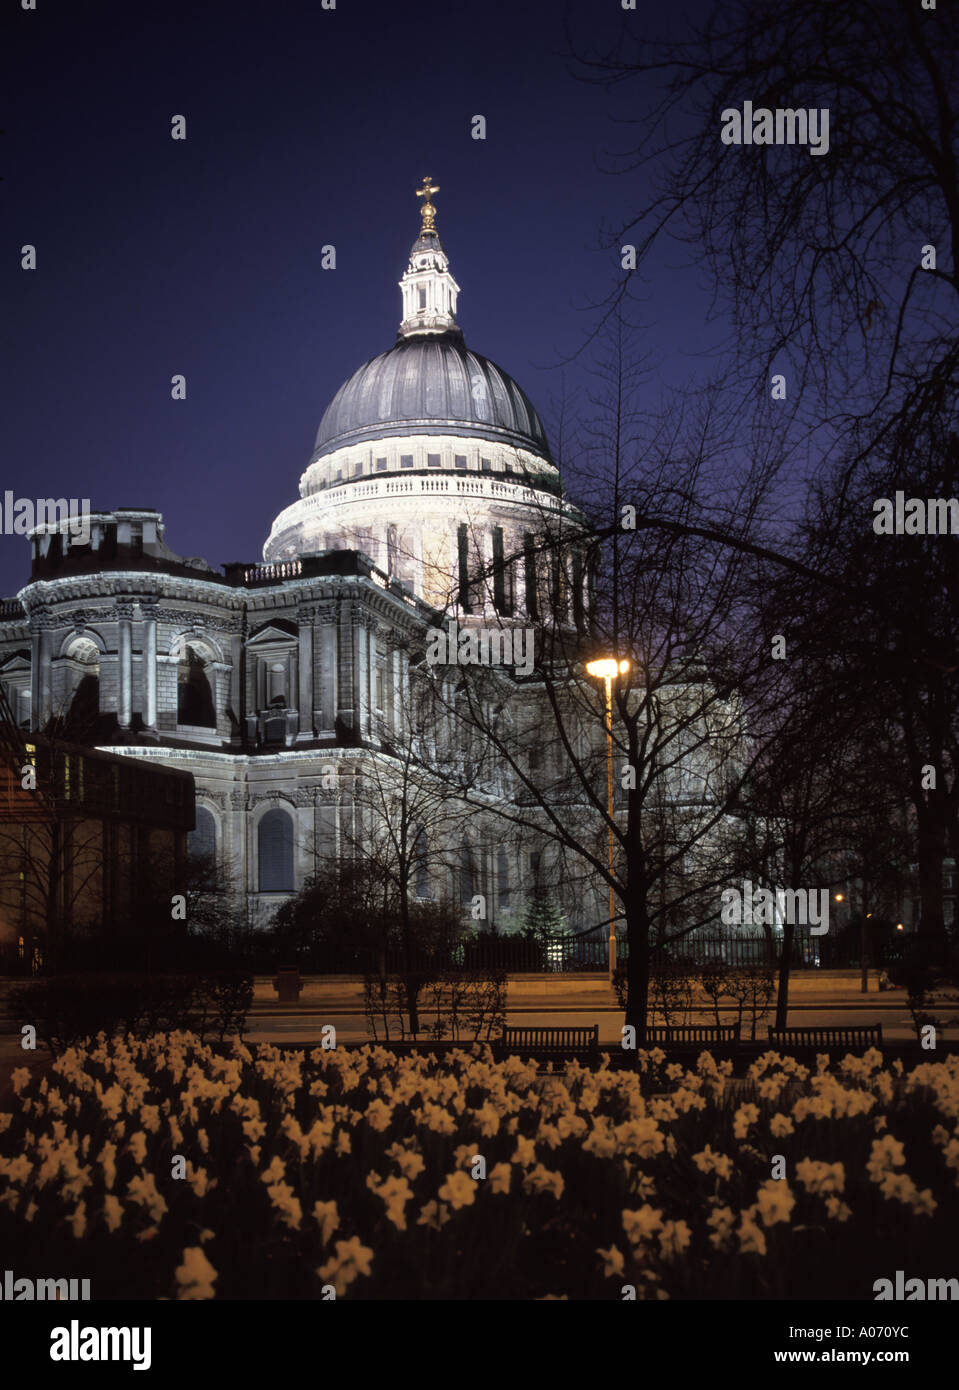 Evening floodlit view of historical St Pauls cathedral & dome blue dusk sky with spring daffodils in flower Ludgate Hill City of London England UK Stock Photo